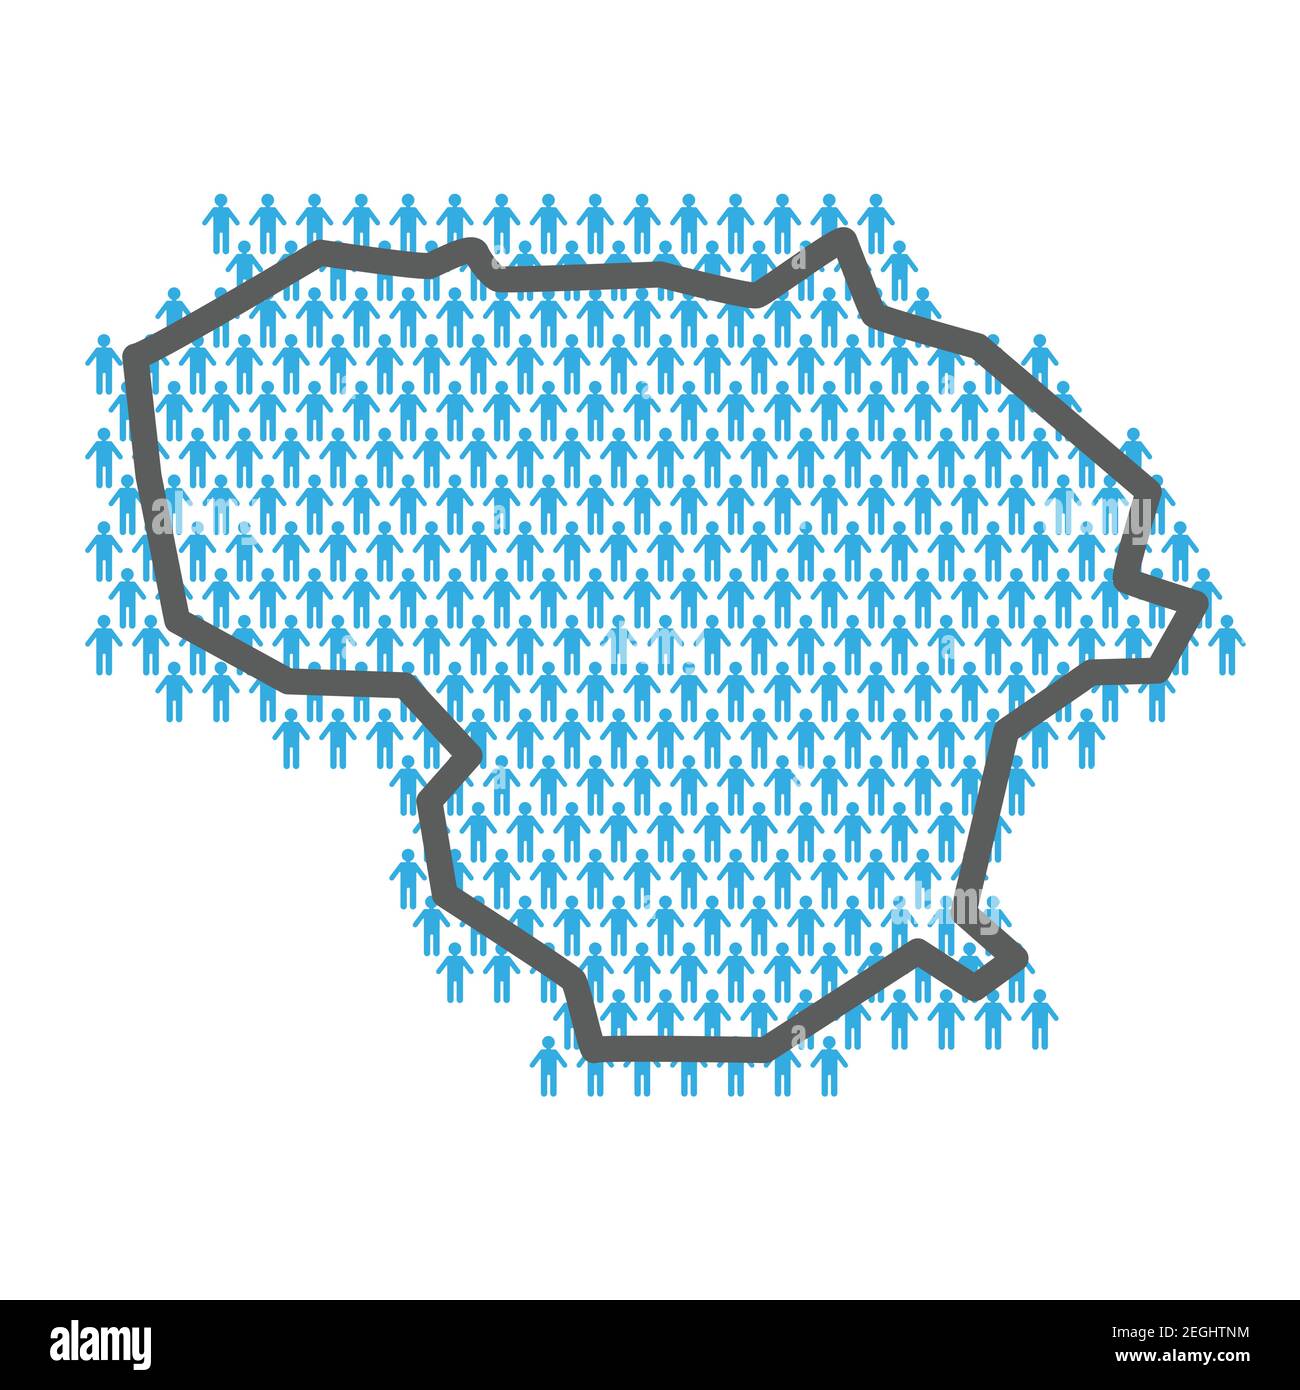 Lithuania population map. Country outline made from people figures Stock Vector